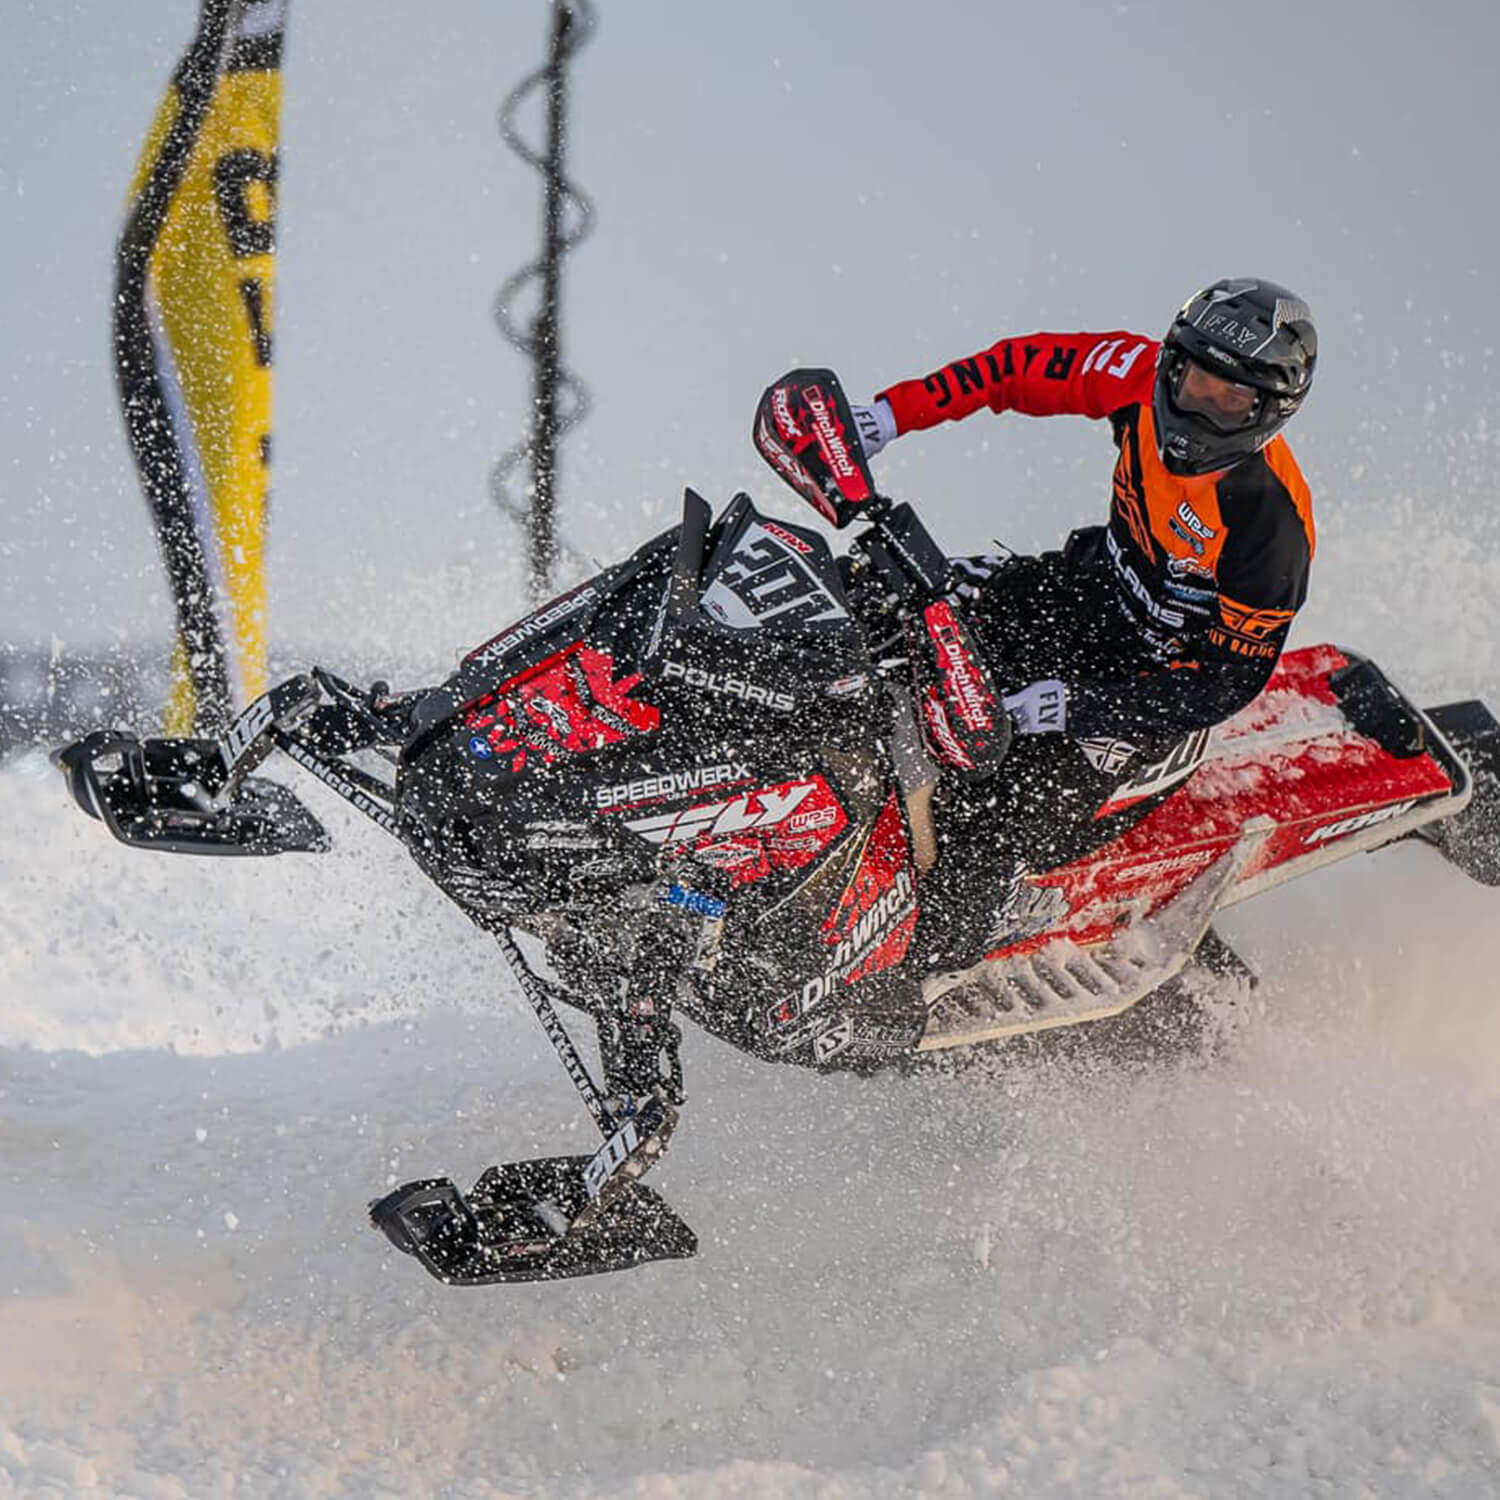 Snocross racer Travis Kern racing snowmobile for Cottew Motorsports with C&A Pro XT skis